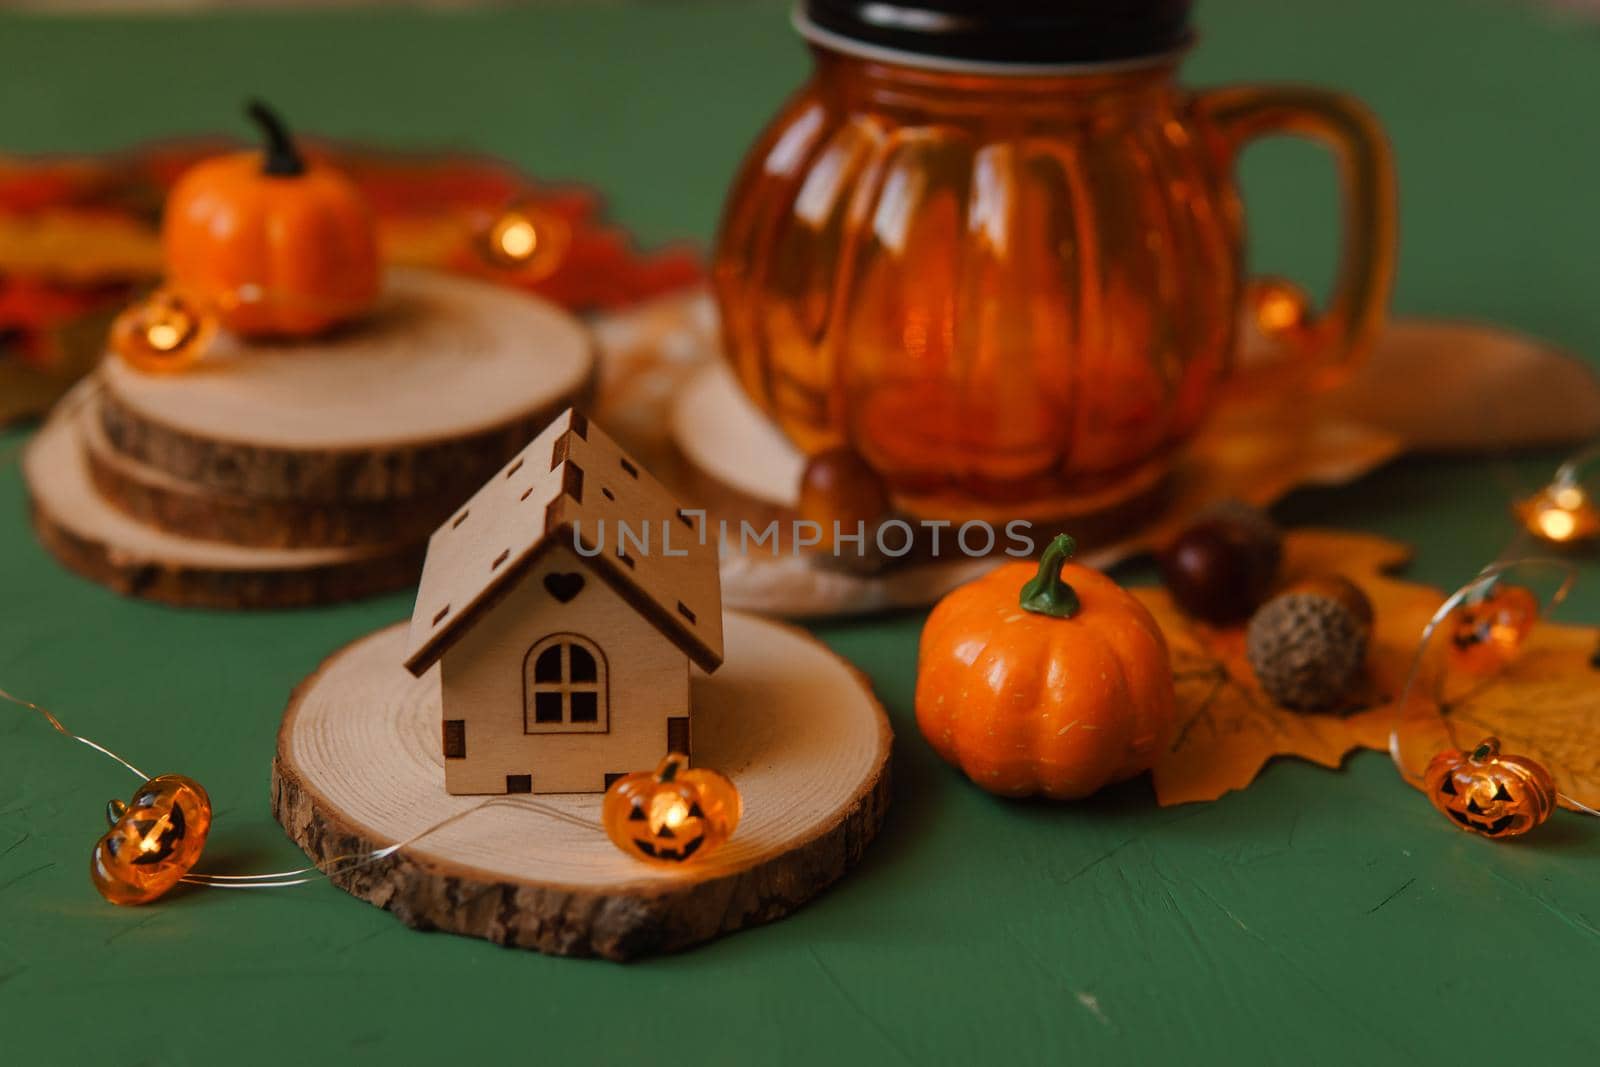 Autumn decor in the theme of the Halloween holiday